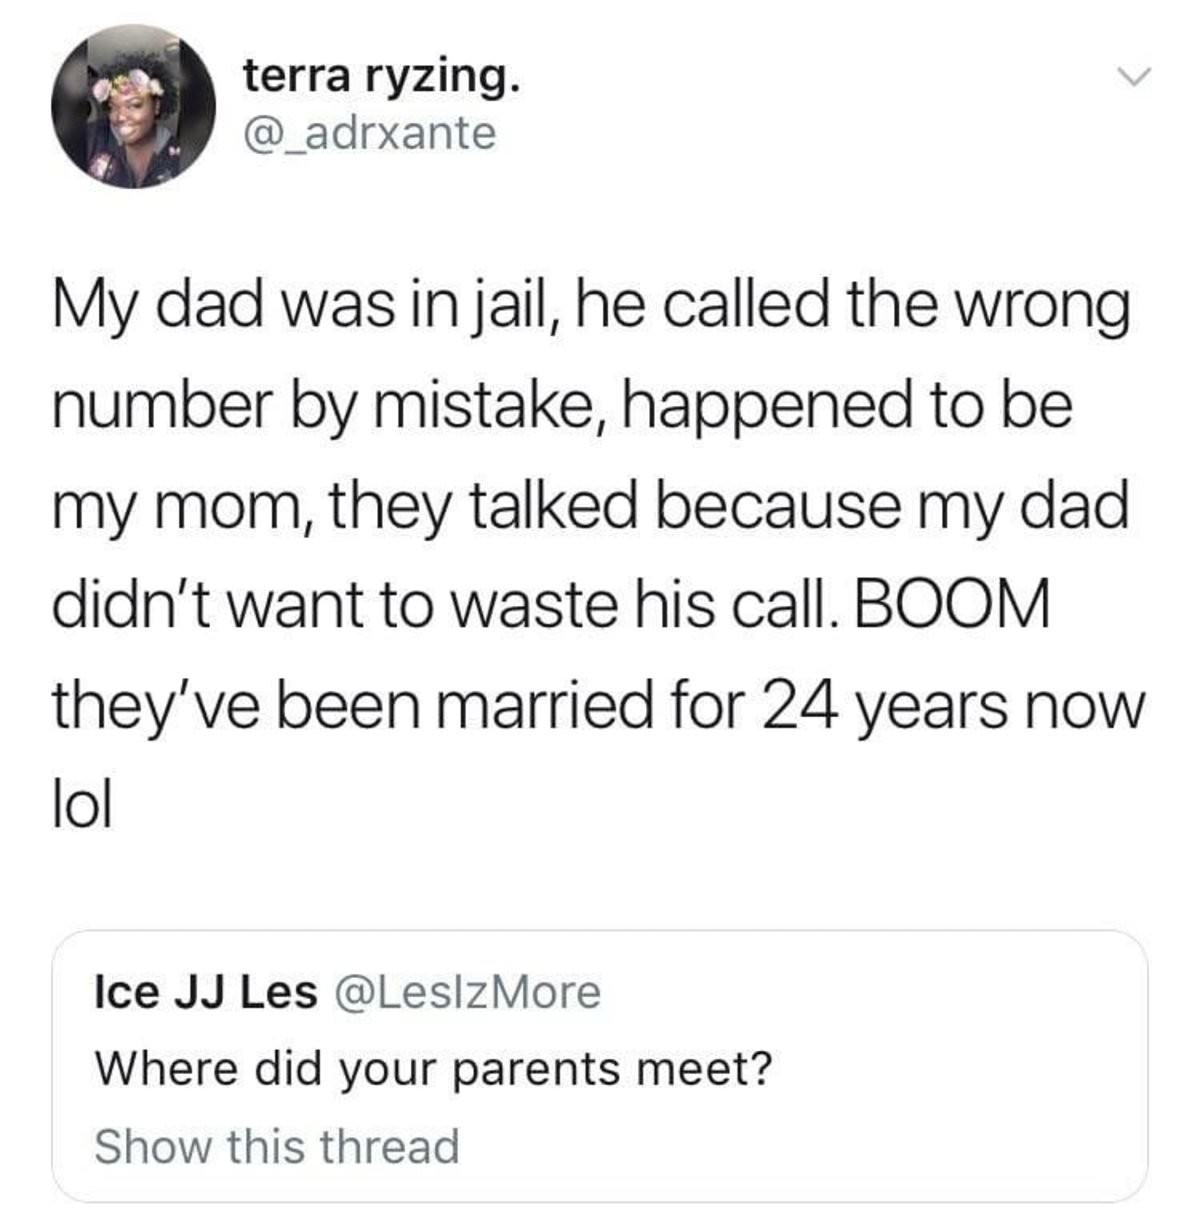 la croix four loko meme - terra ryzing. My dad was in jail, he called the wrong number by mistake, happened to be my mom, they talked because my dad didn't want to waste his call. Boom they've been married for 24 years now Ice Jj Les Where did your parent